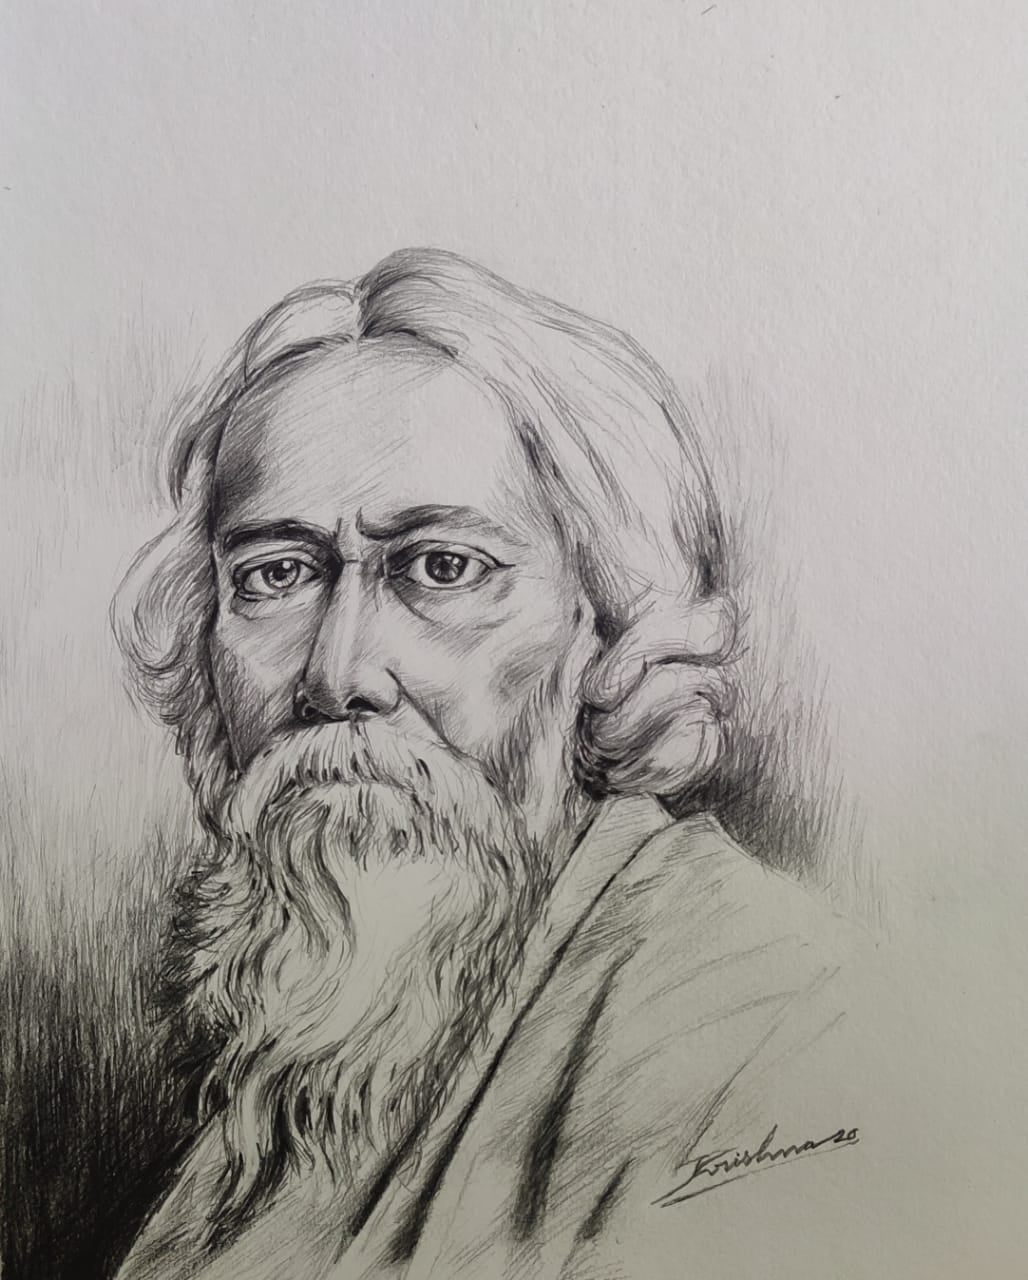 Watercolor Sketch Hand Drawn For Rabindranath Tagore Jayanti Design Rabindranath  Tagore Jayanti Rabindranath Tagore Jayanti 2023 Rabindranath Tagore  Jayanti Design PNG Transparent Clipart Image and PSD File for Free Download